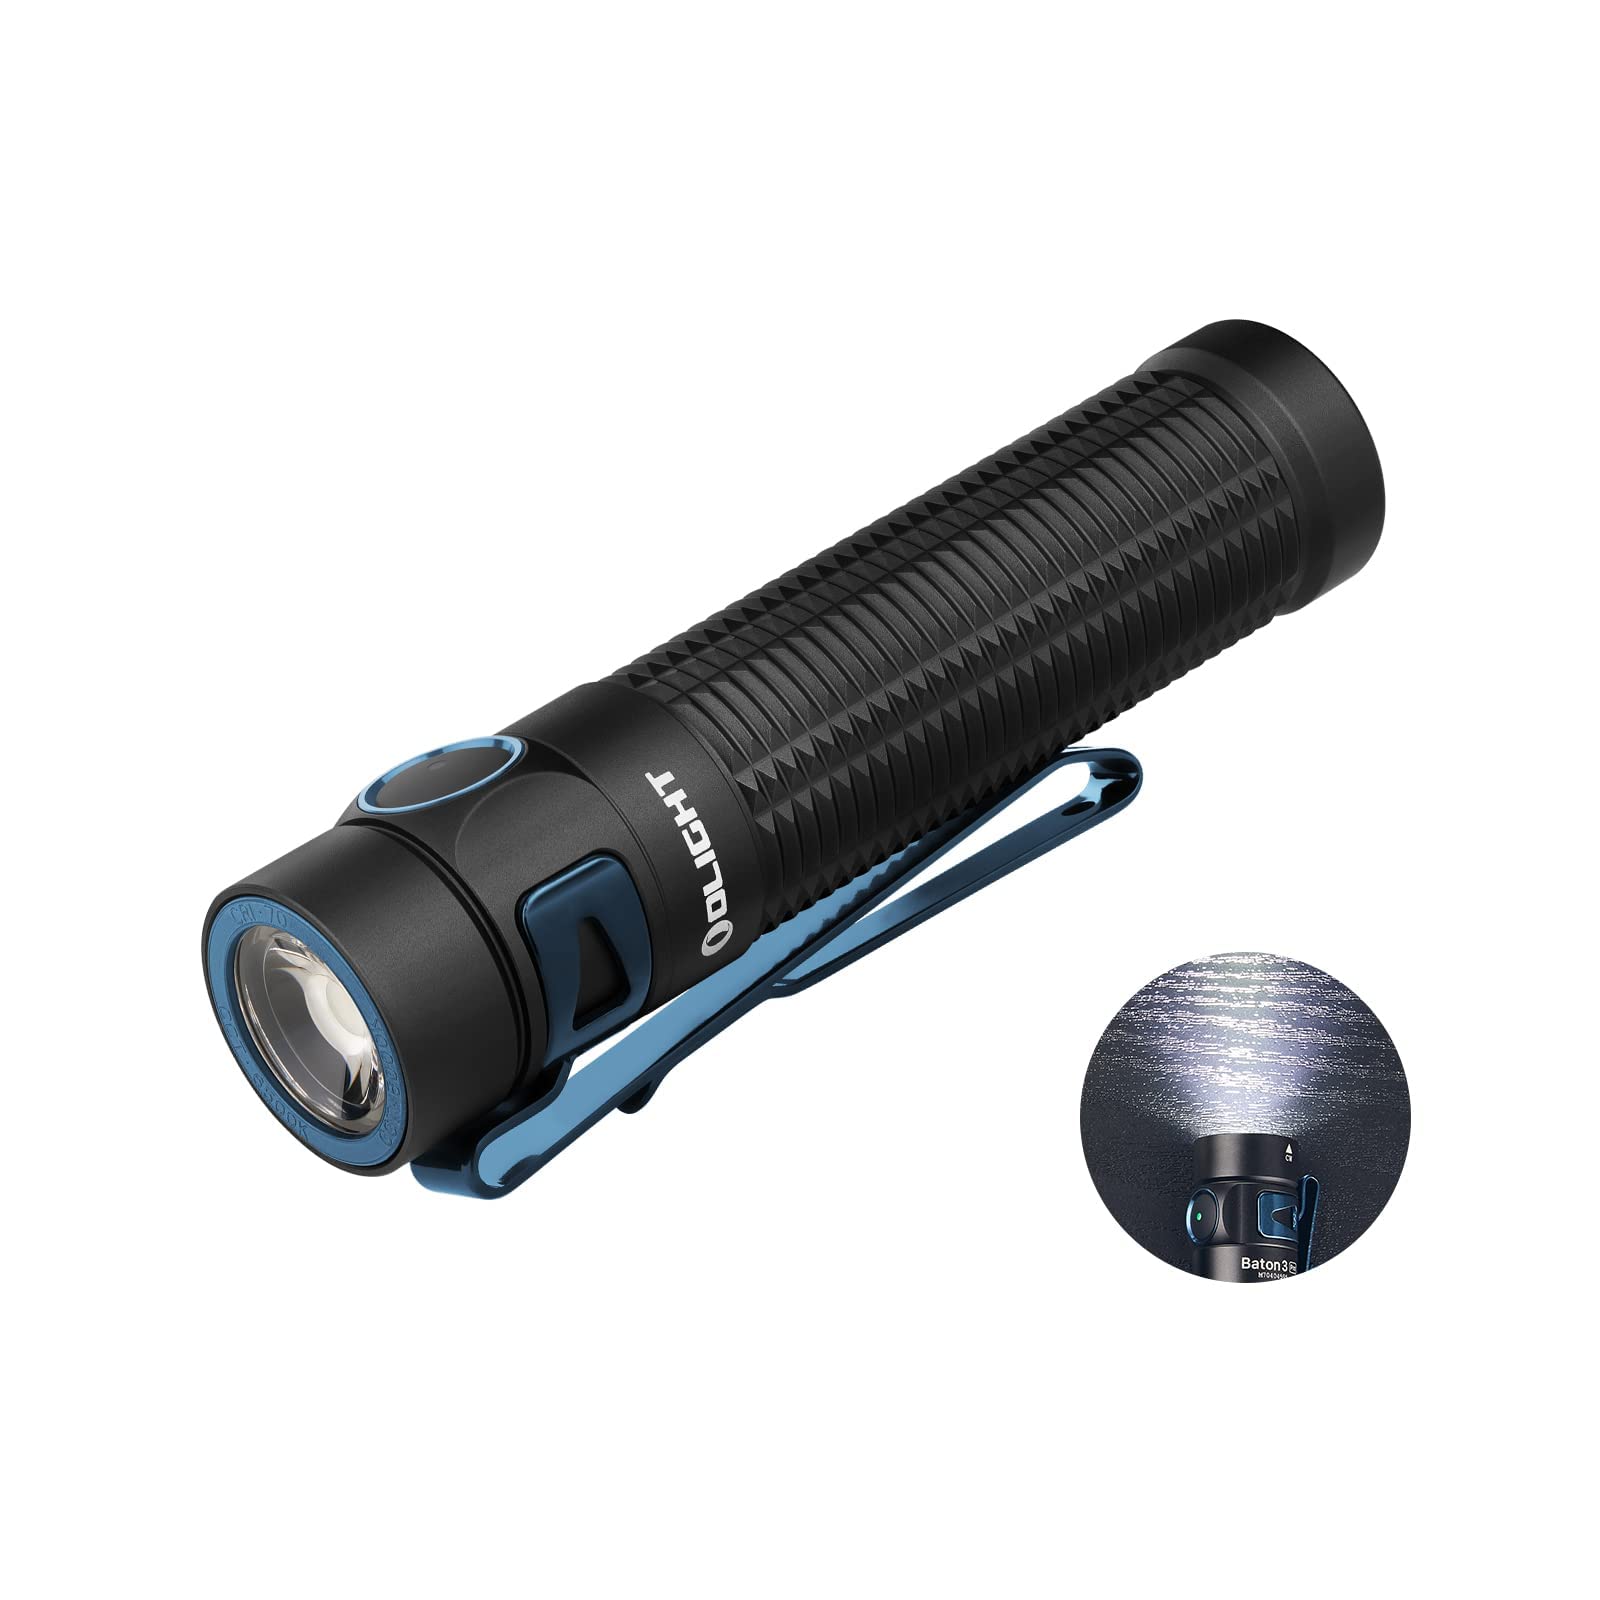 Olight Baton3 Pro 1500 Lumens EDC Rechargeable Flashlights with MCC3, Compact Pocket Flashlight with L-Shape Stand and High Performance LED for Camping, Hiking and Emergency